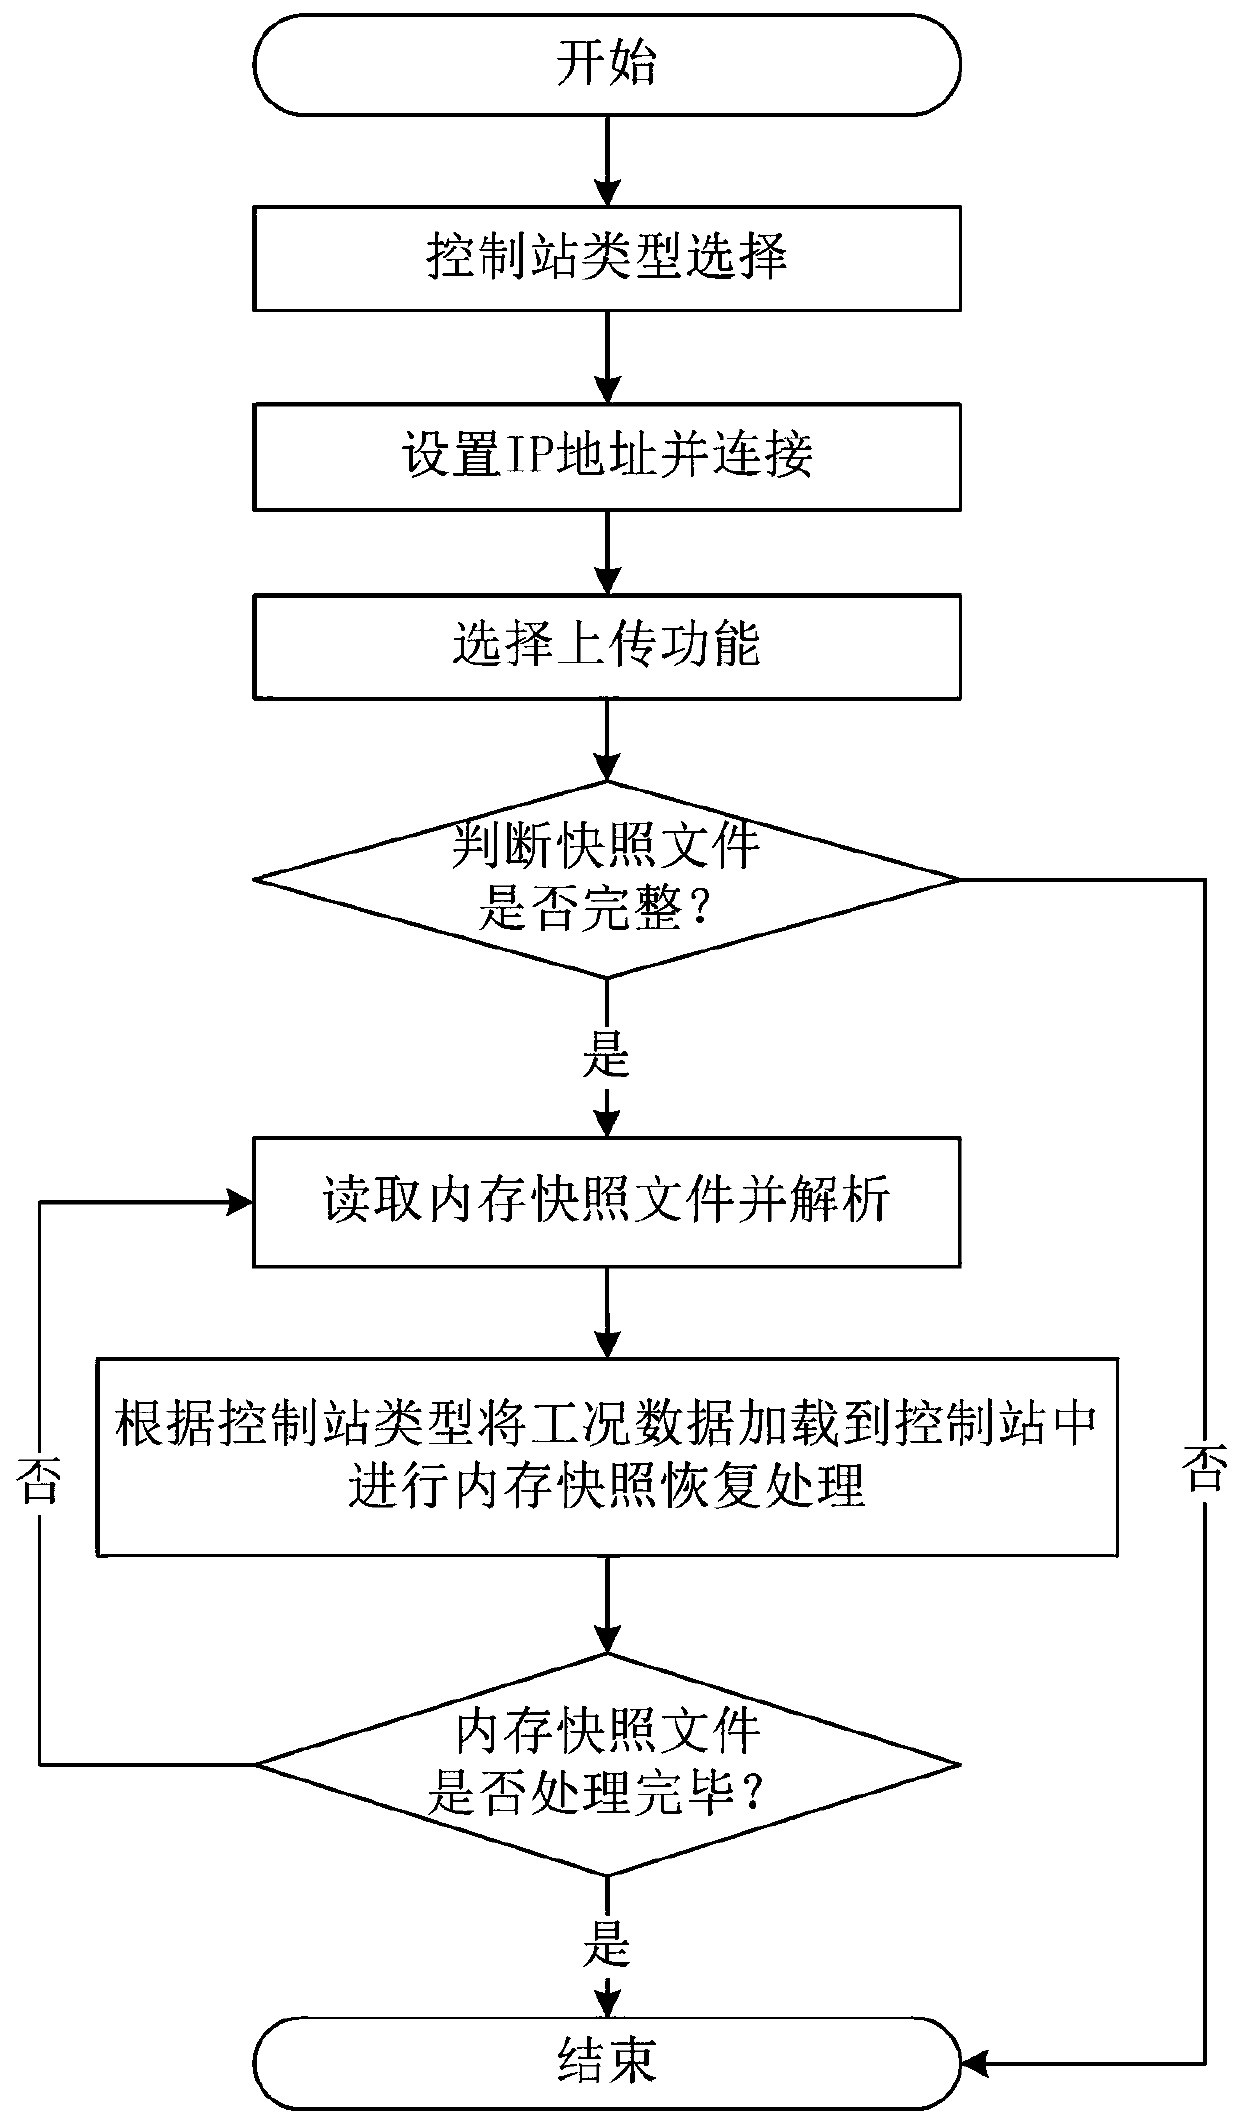 A memory snapshot management method in an industrial control system